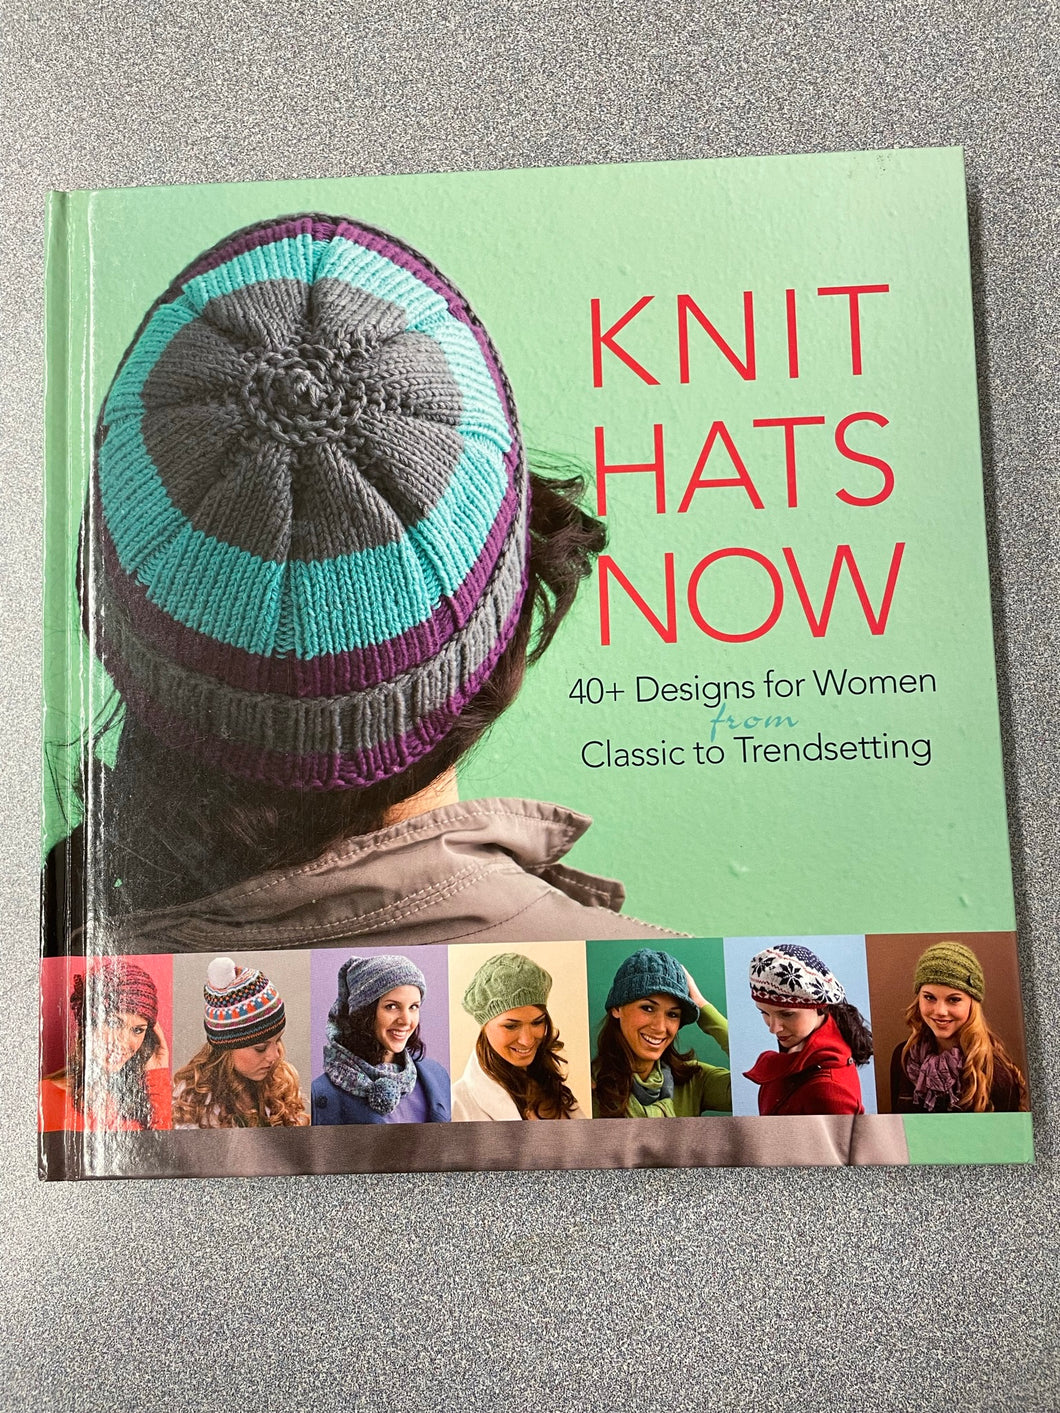 Knit Hats Now: 40+ Designs for Women From Classic To Trendsetting, Muh, Andrea, Ed., [2012] CG 12/22